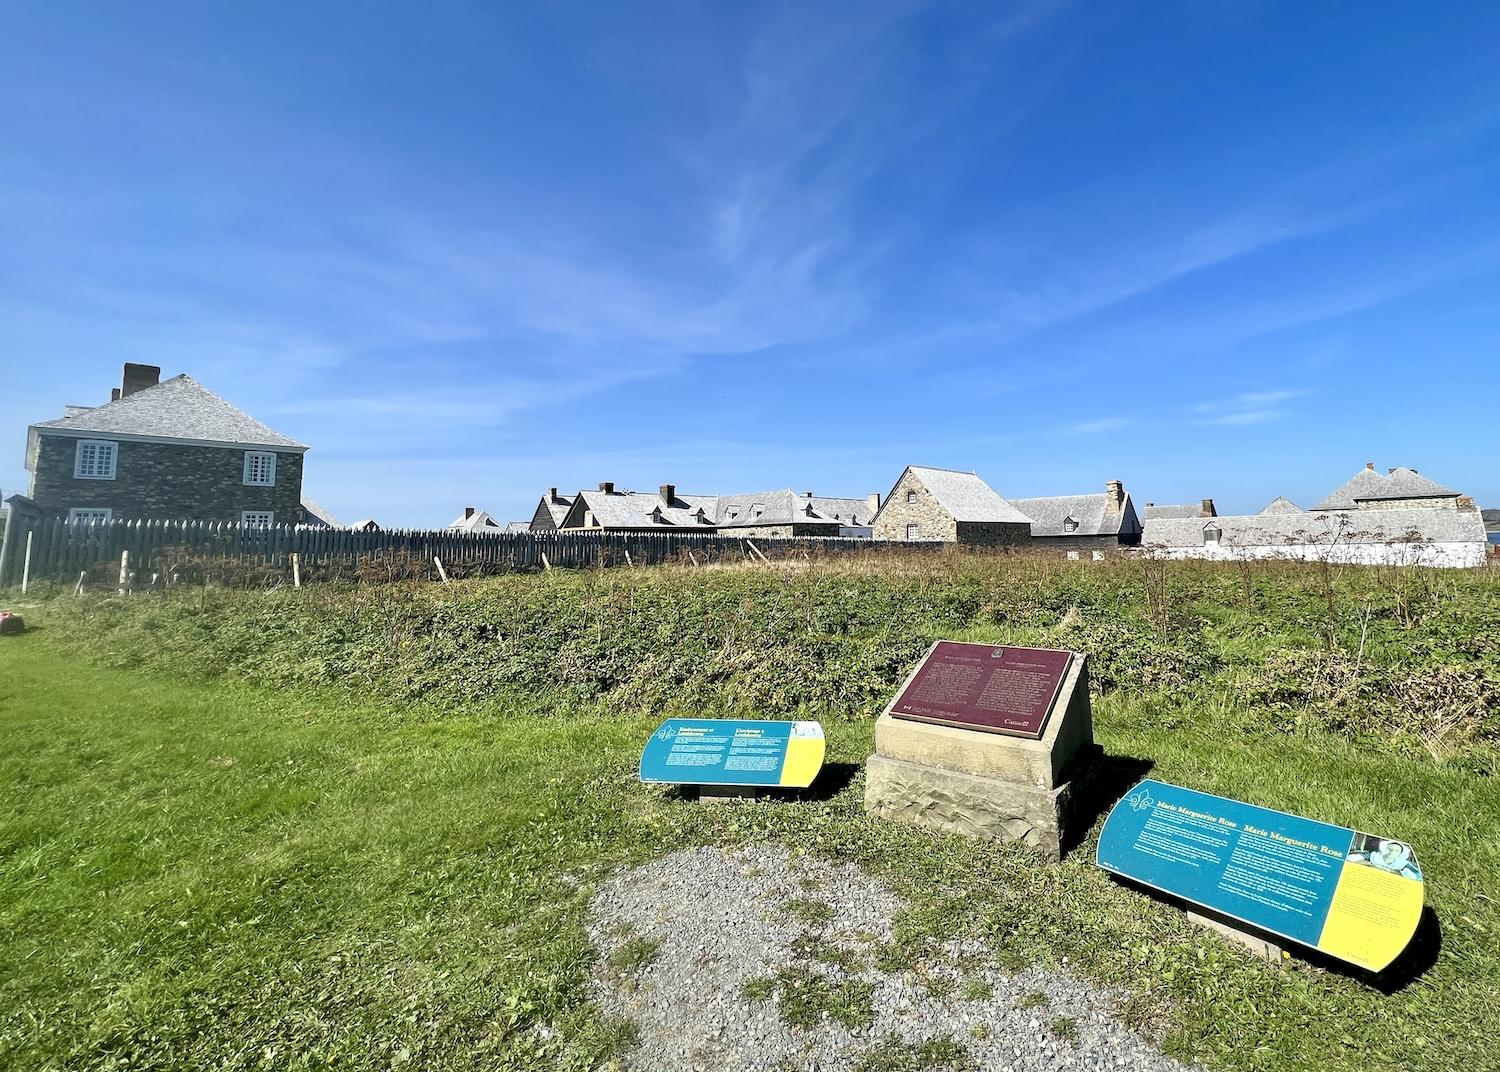 Don't miss the monument dedicated to Marie Marguerite Rose, and the panels about enslavement at the Fortress of Louisbourg.